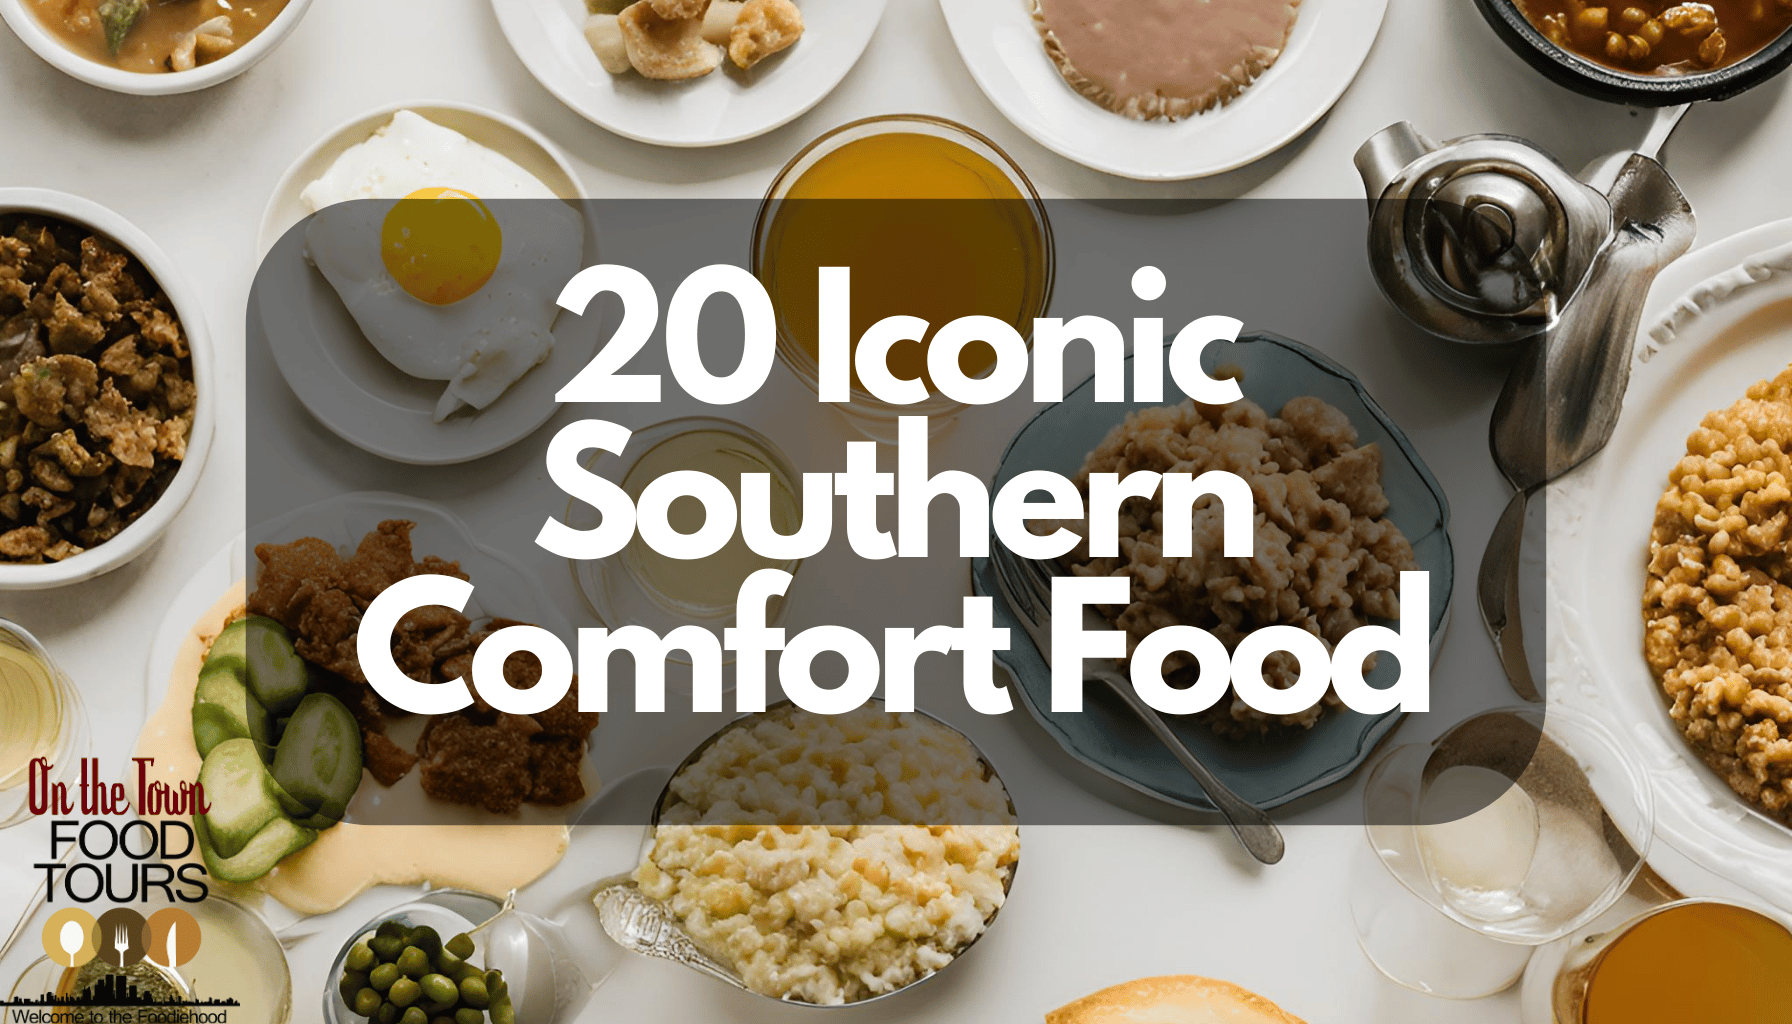 Iconic Southern Comfort Food